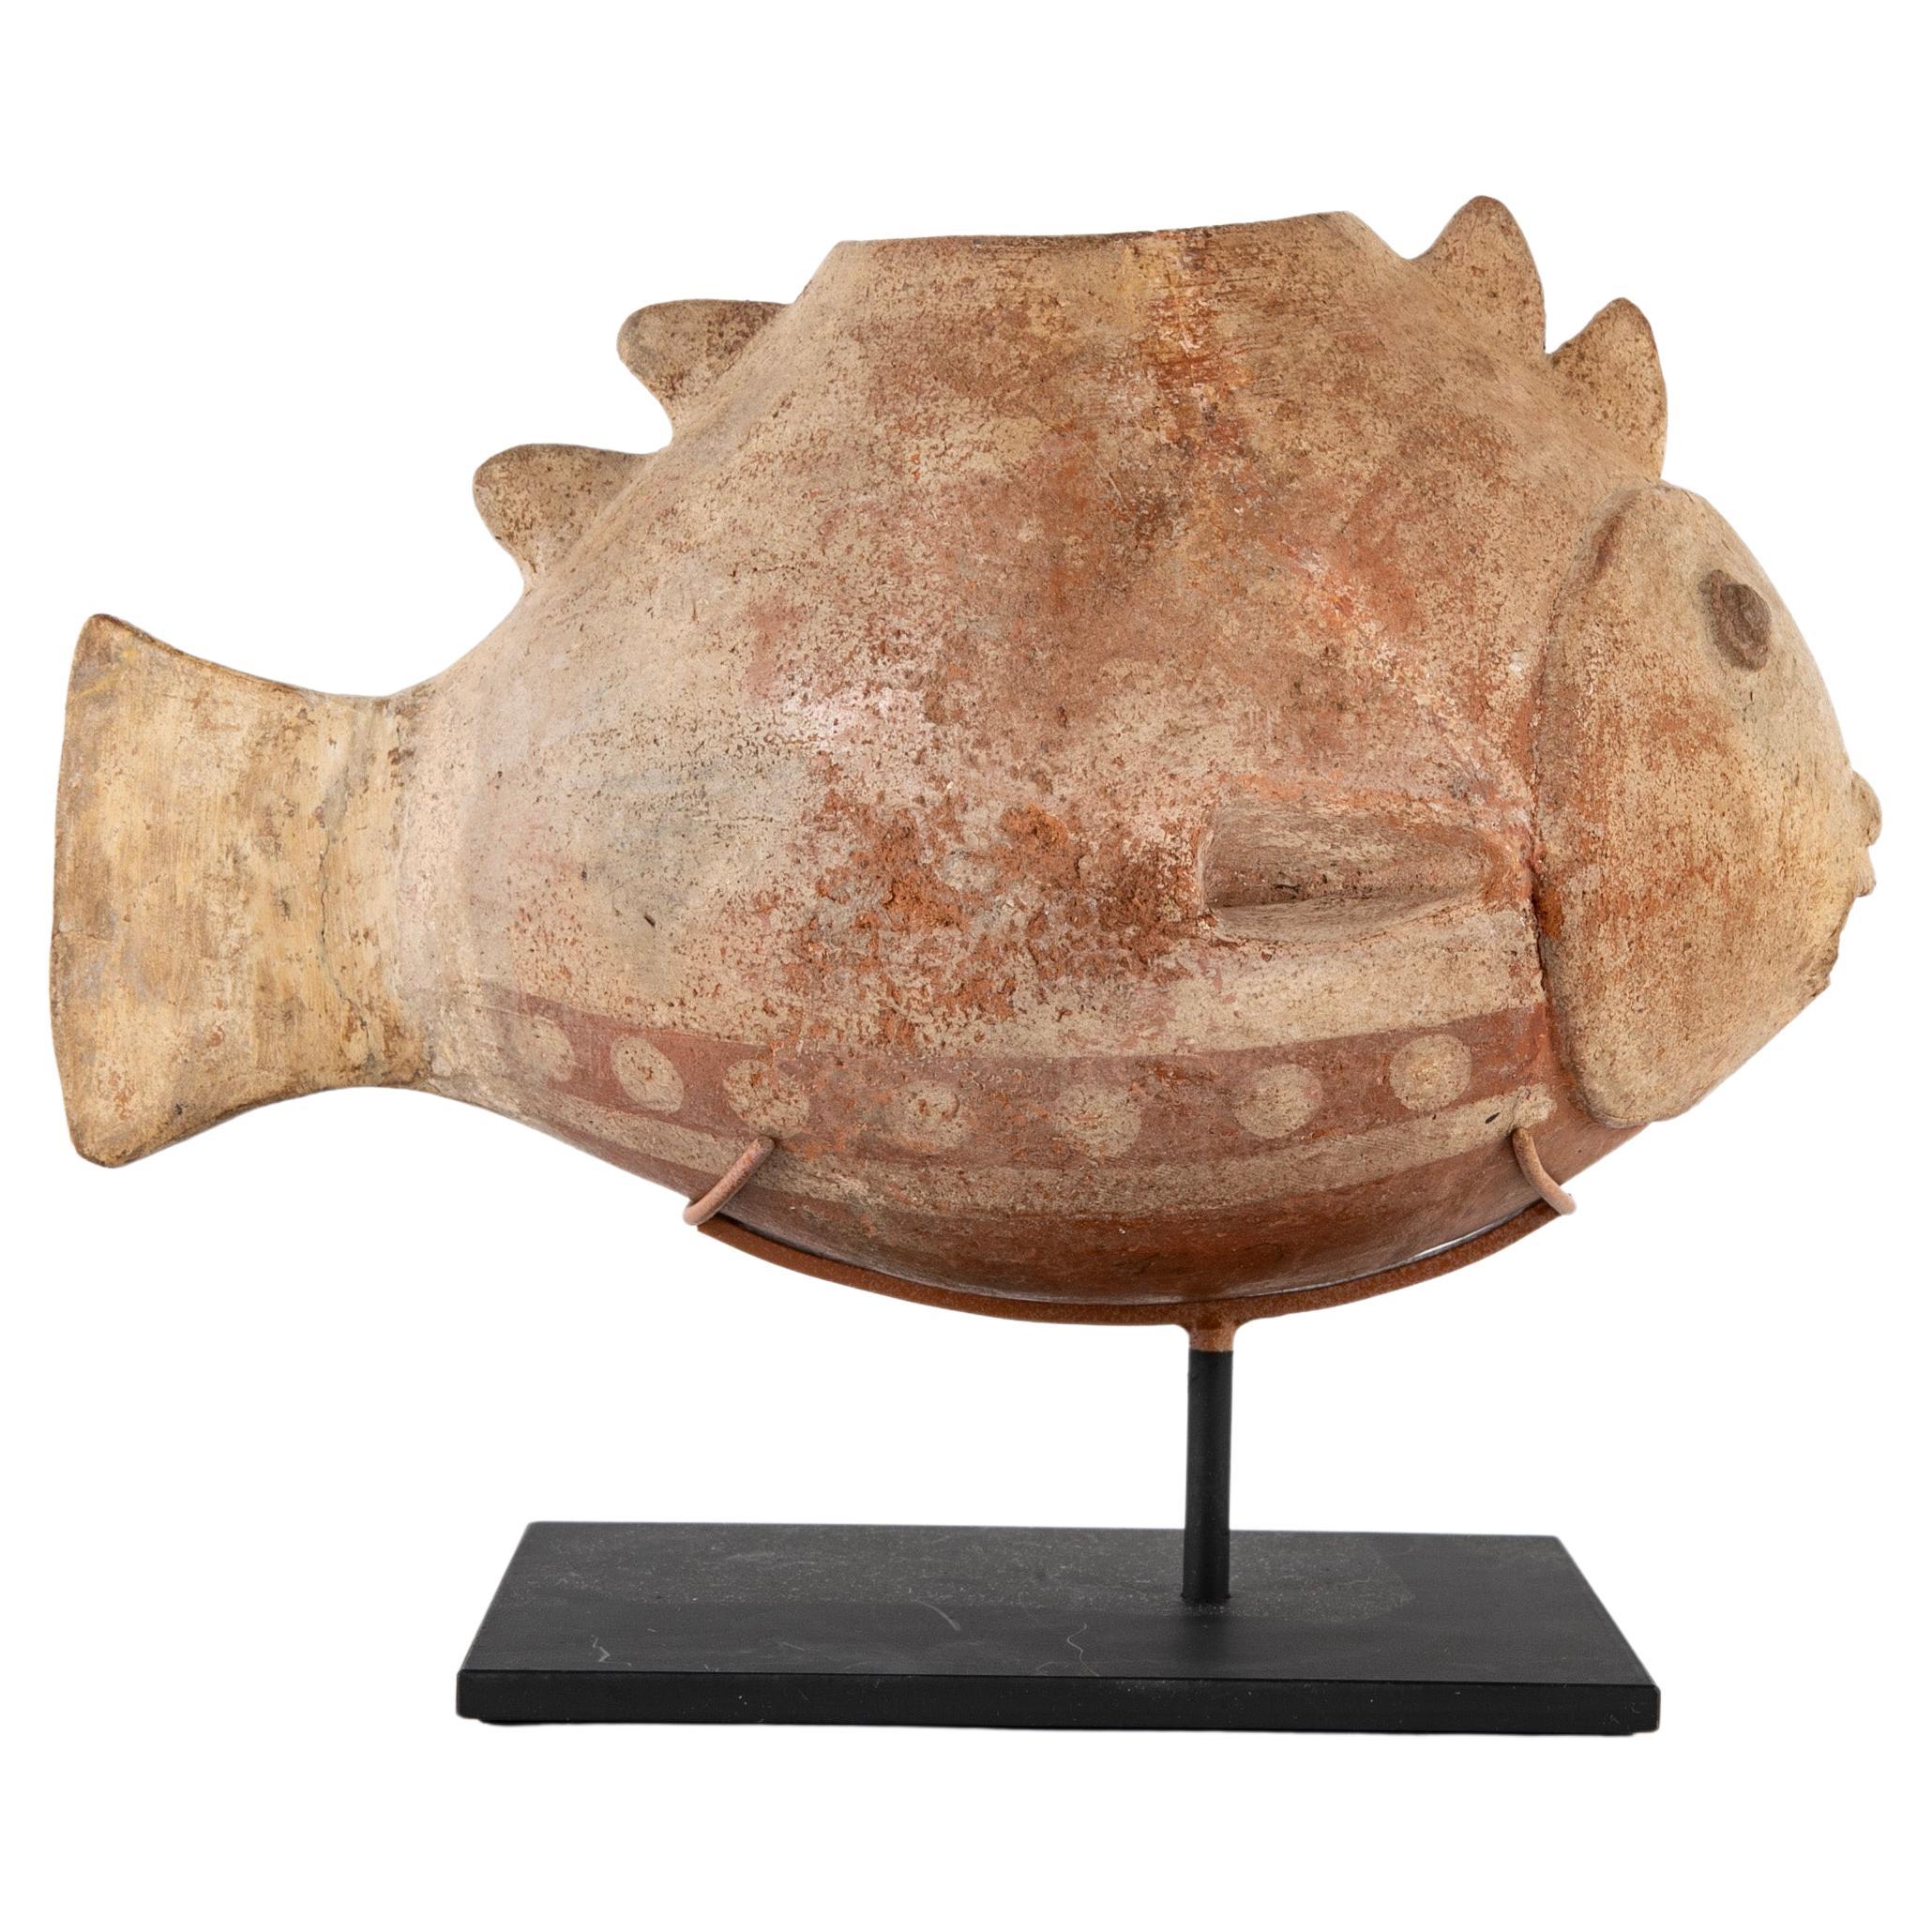 A Colima Shark Effigy Vessel For Sale